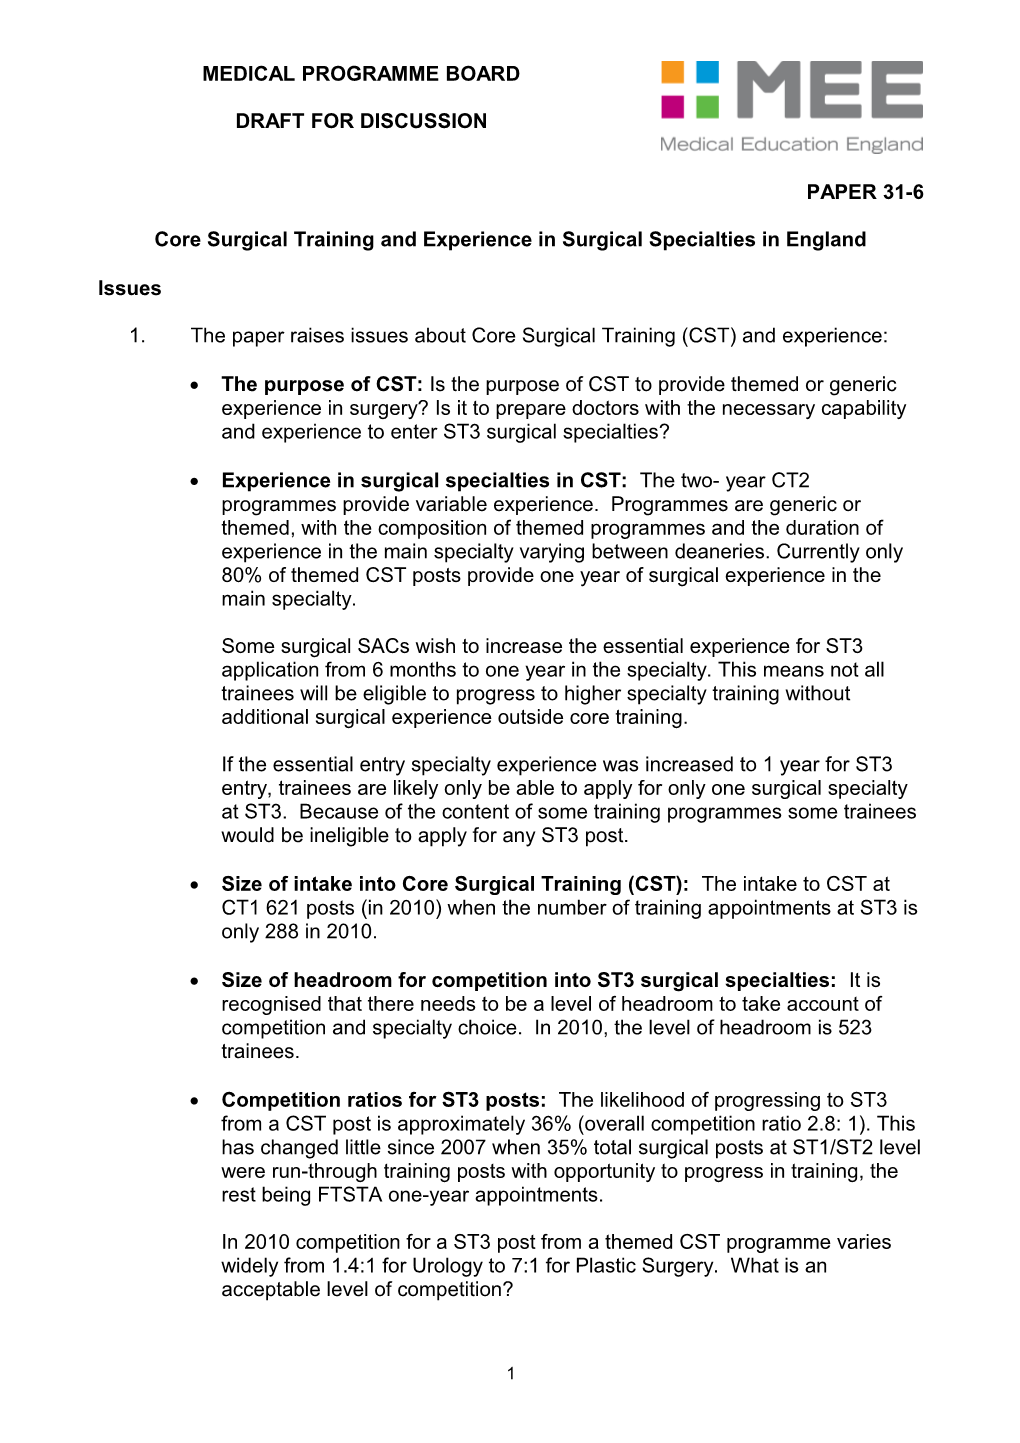 Core Surgical Training and Selection Into ST3 Surgical Subspecialties